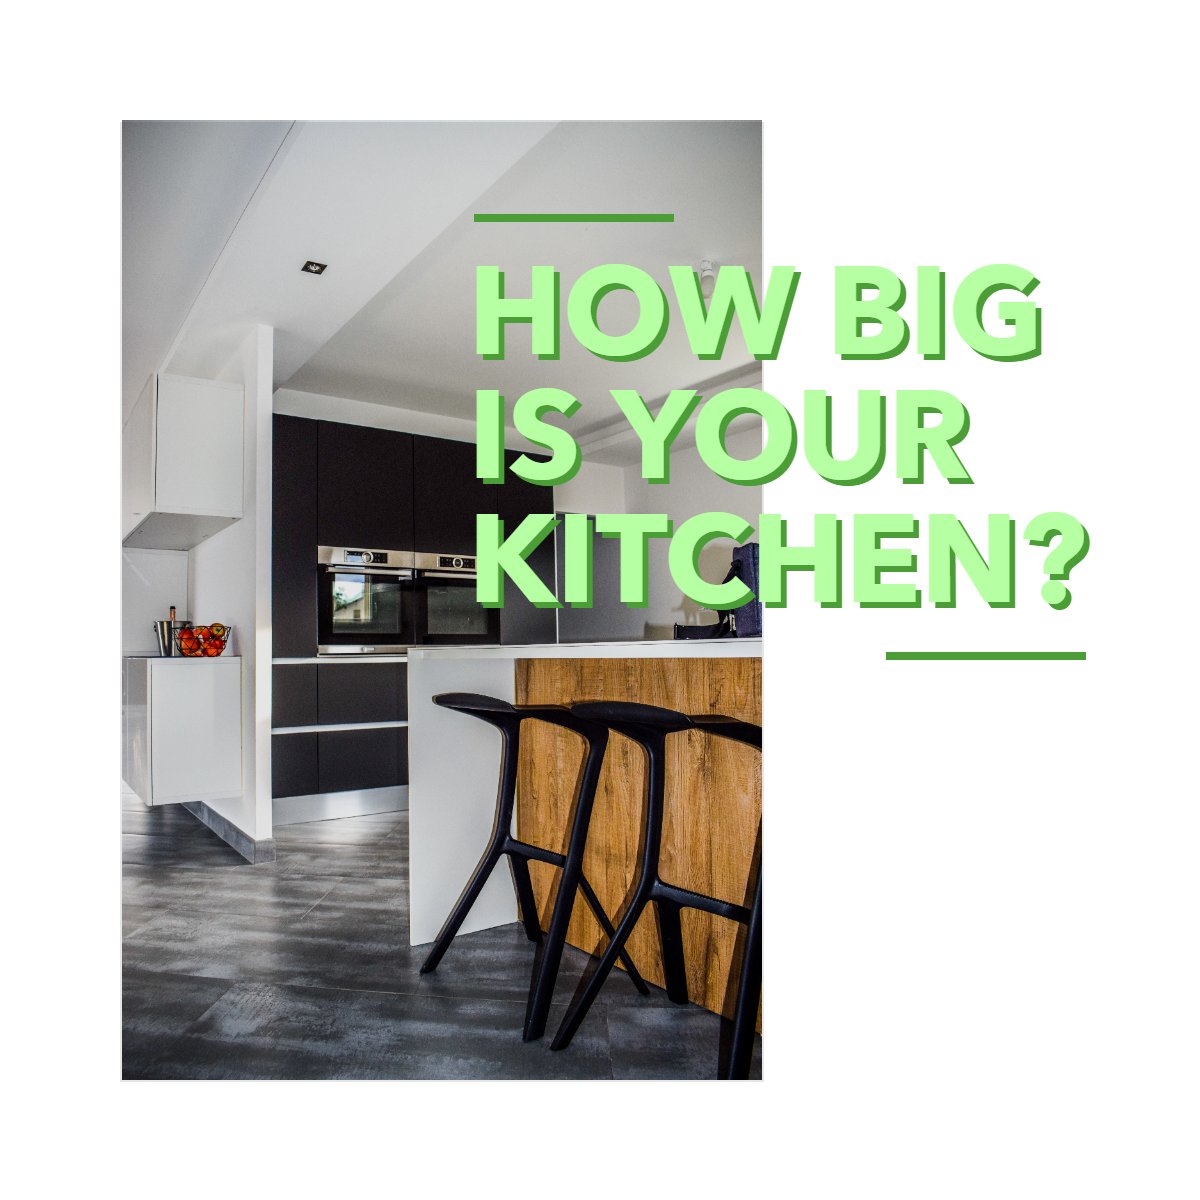 In the US, the average kitchen size for single homes is 161 square feet. How big is your kitchen? #realestate #kitchensize #kitchen #homes